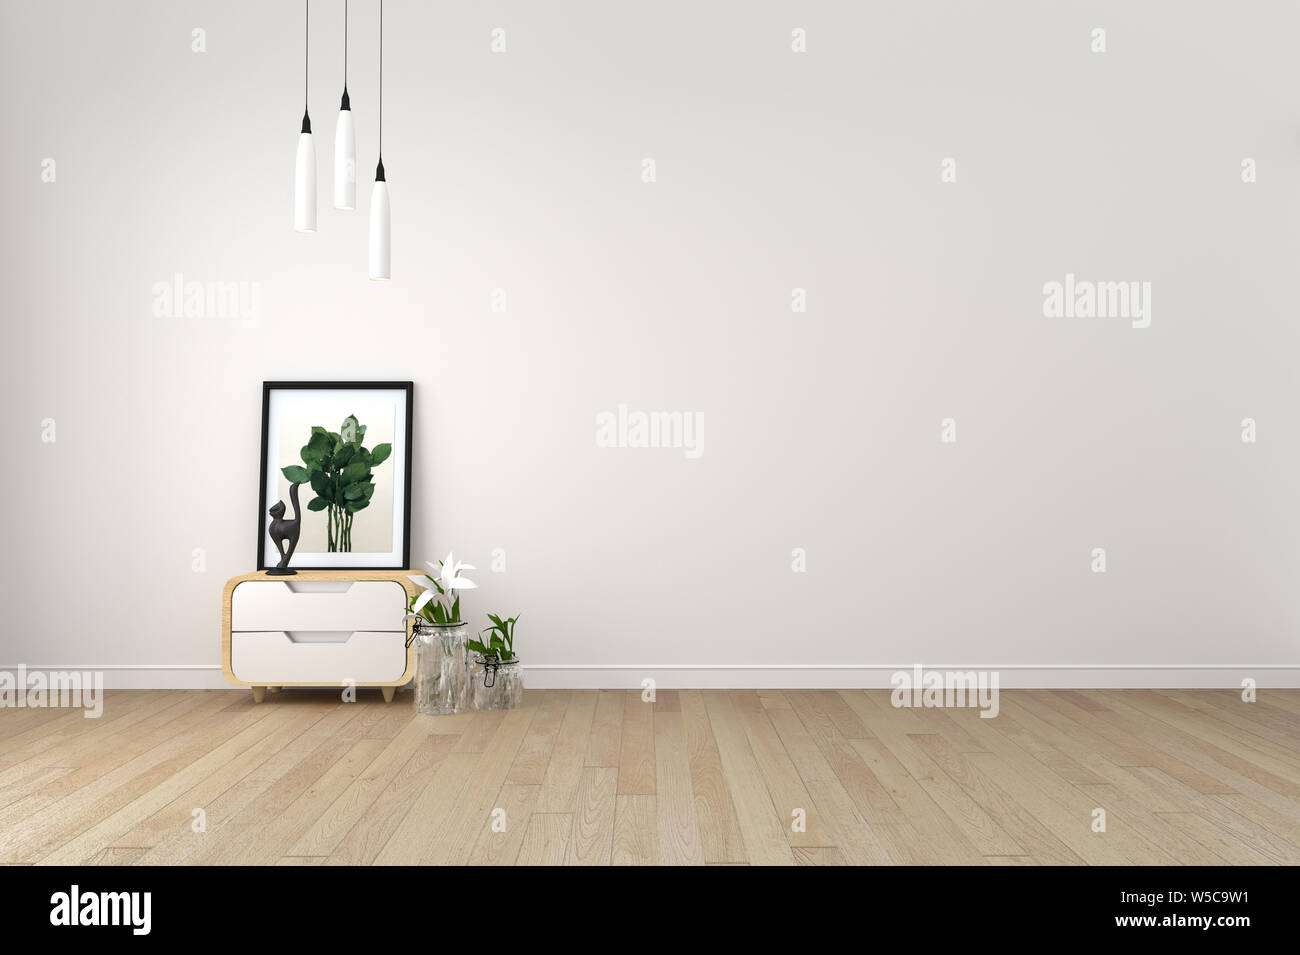 Interior Wall Stock Photos Images and Backgrounds for Free Download